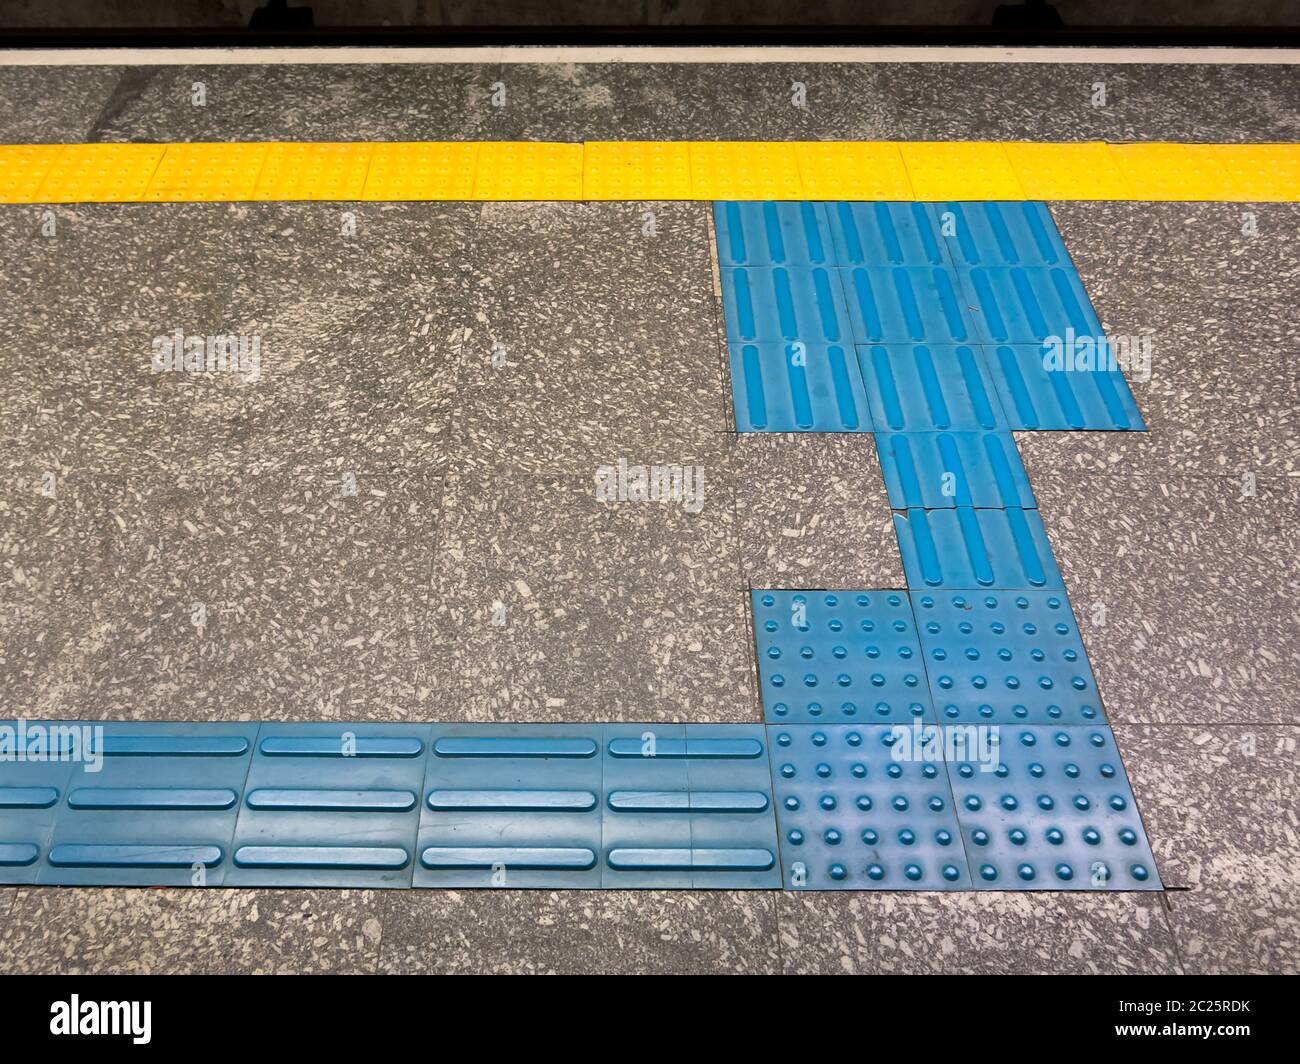 Tactile Ground Surface Indicators for visually impaired in brazilian subway station Stock Photo